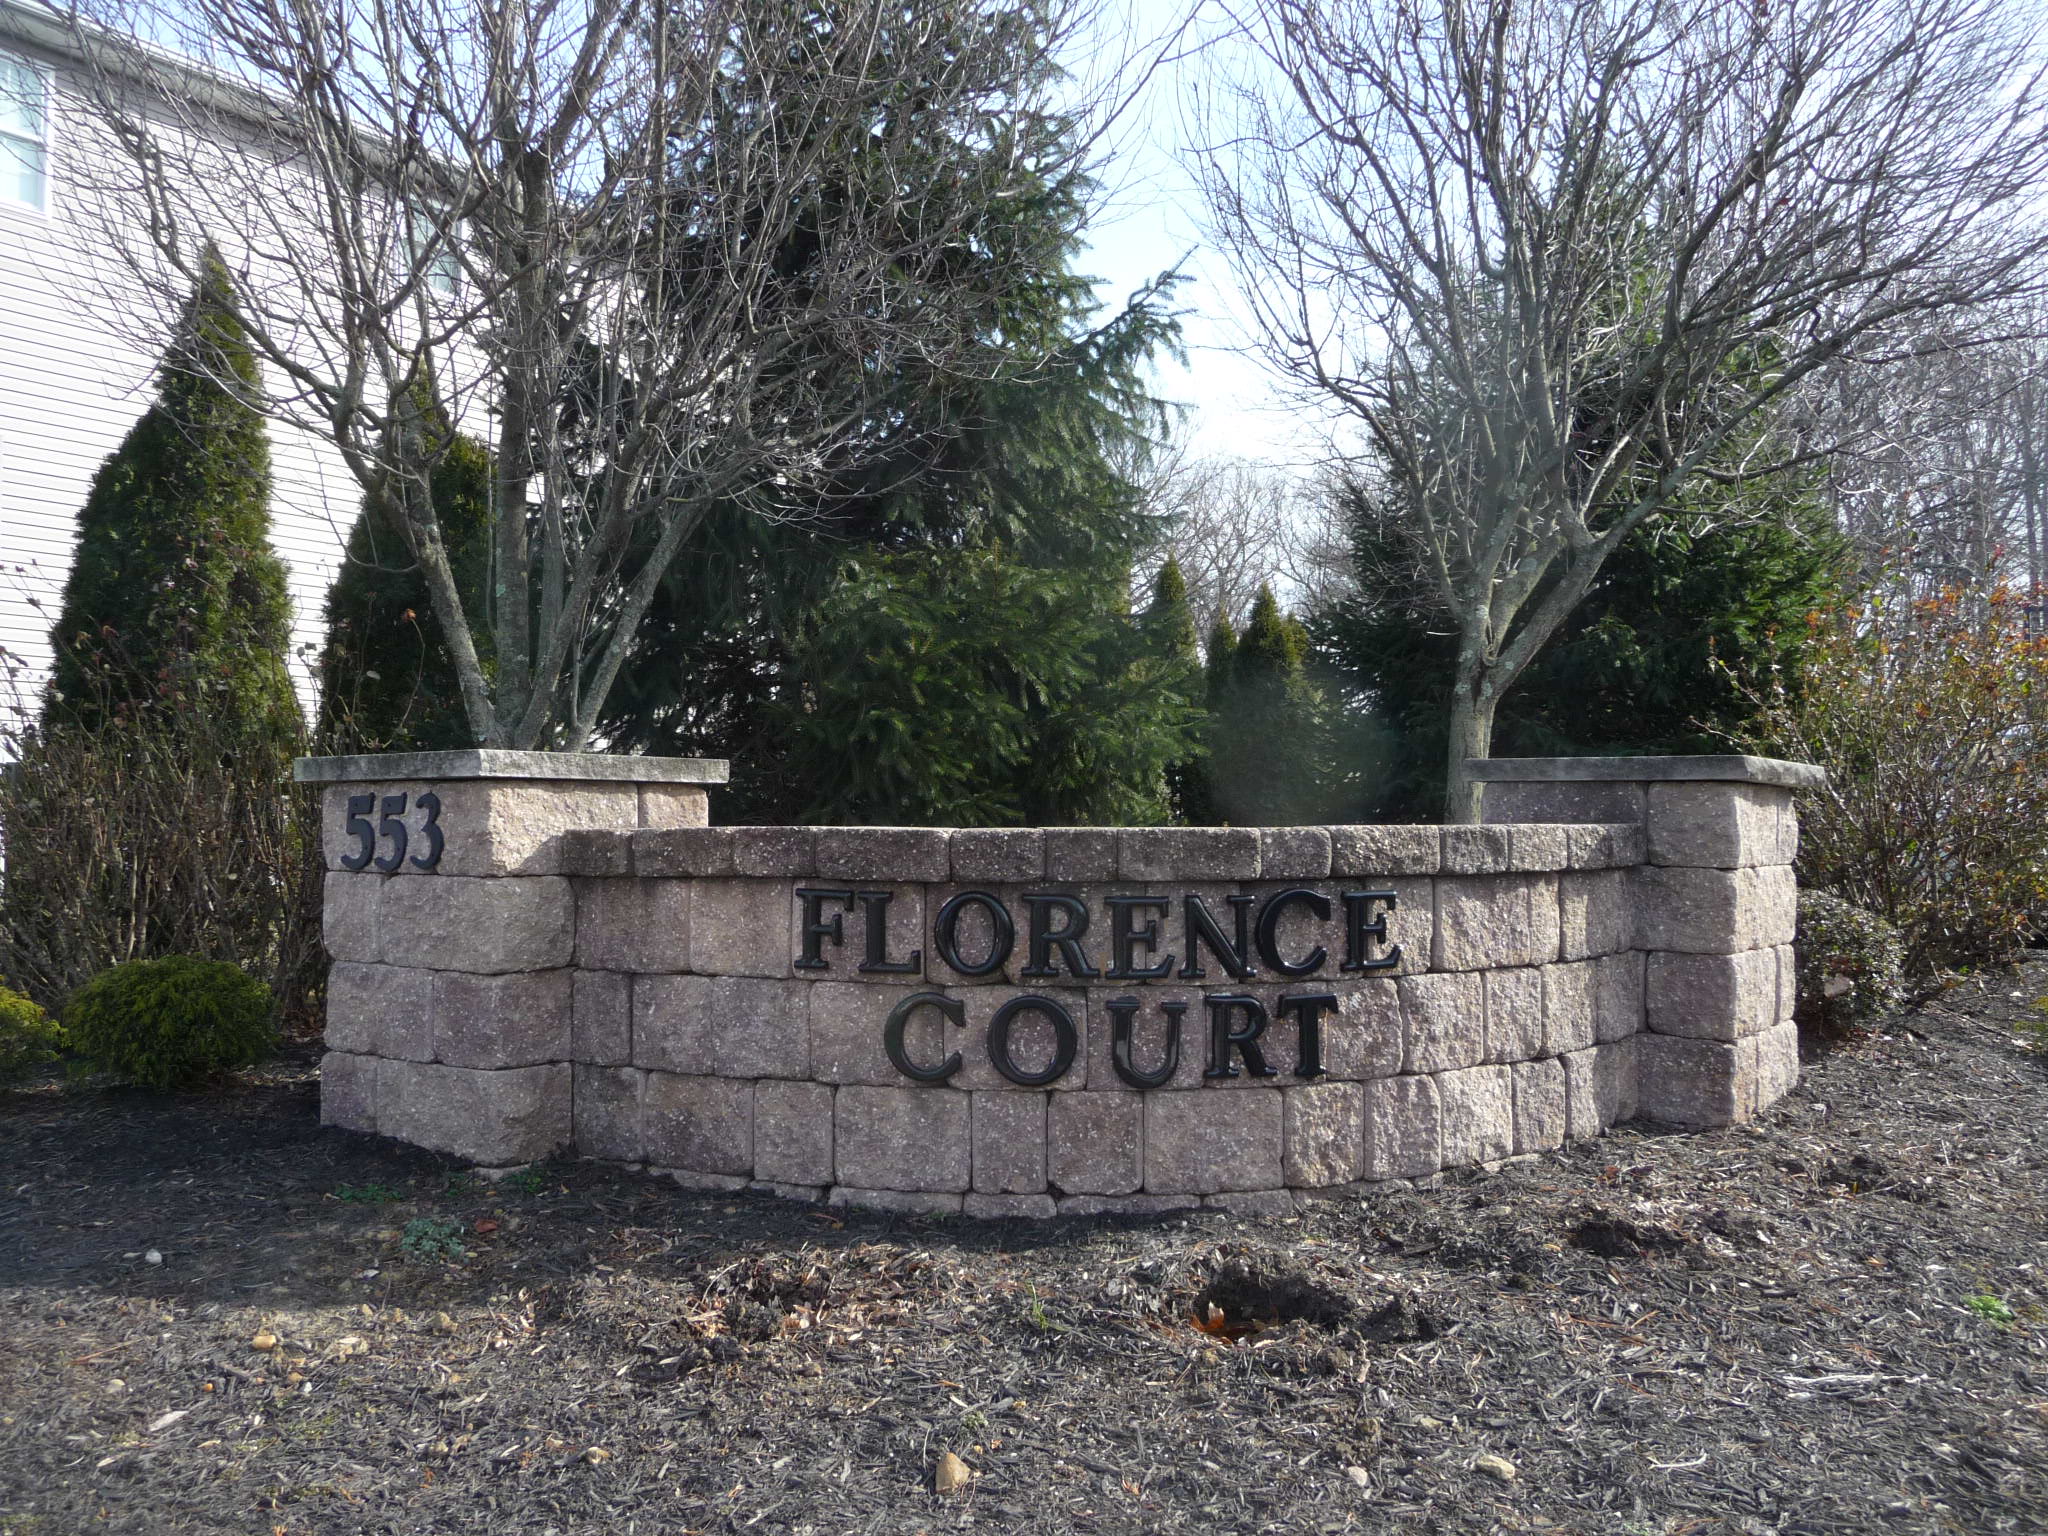 Entrance sign to Florence Court.